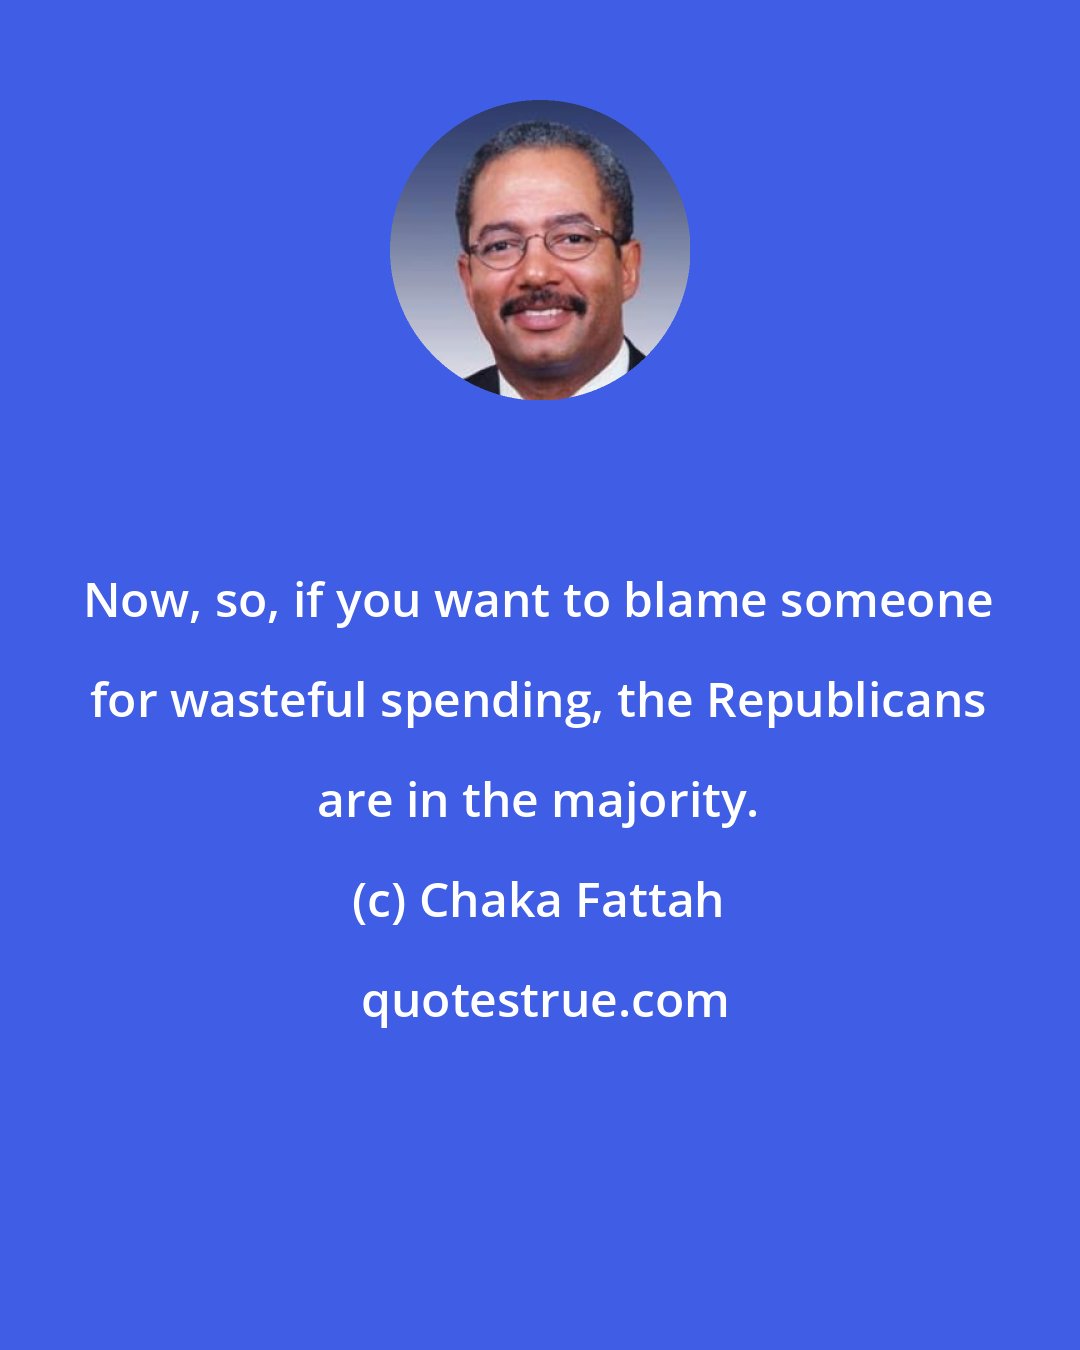 Chaka Fattah: Now, so, if you want to blame someone for wasteful spending, the Republicans are in the majority.